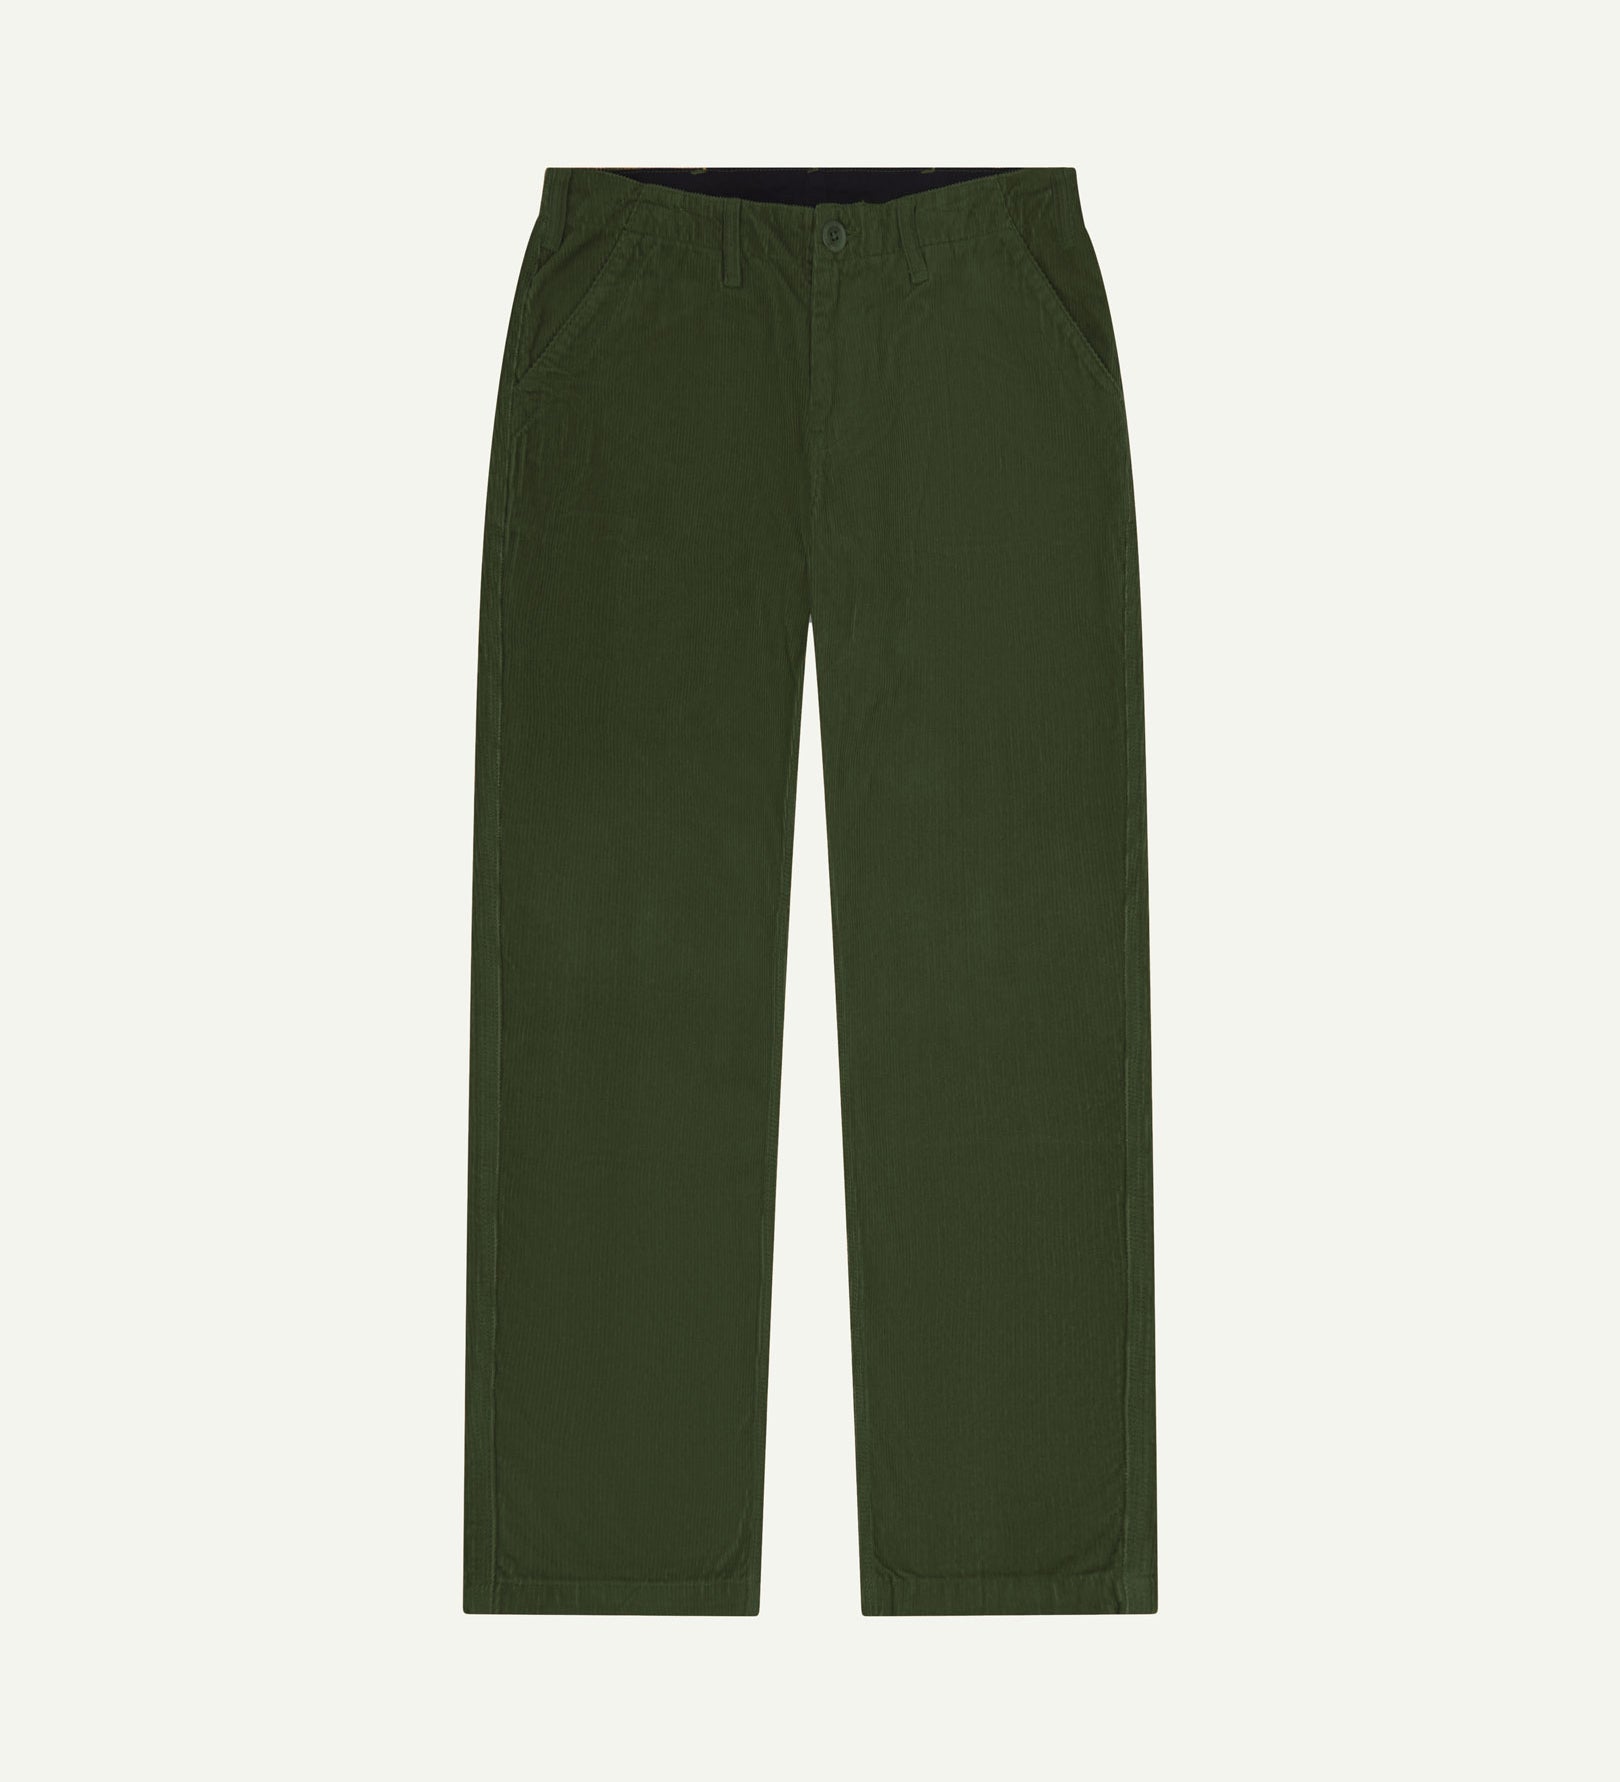 Front flat view of 5005 Uskees men's organic corduroy 'coriander' casual trousers with view of YKK zip fly and Corozo buttons.